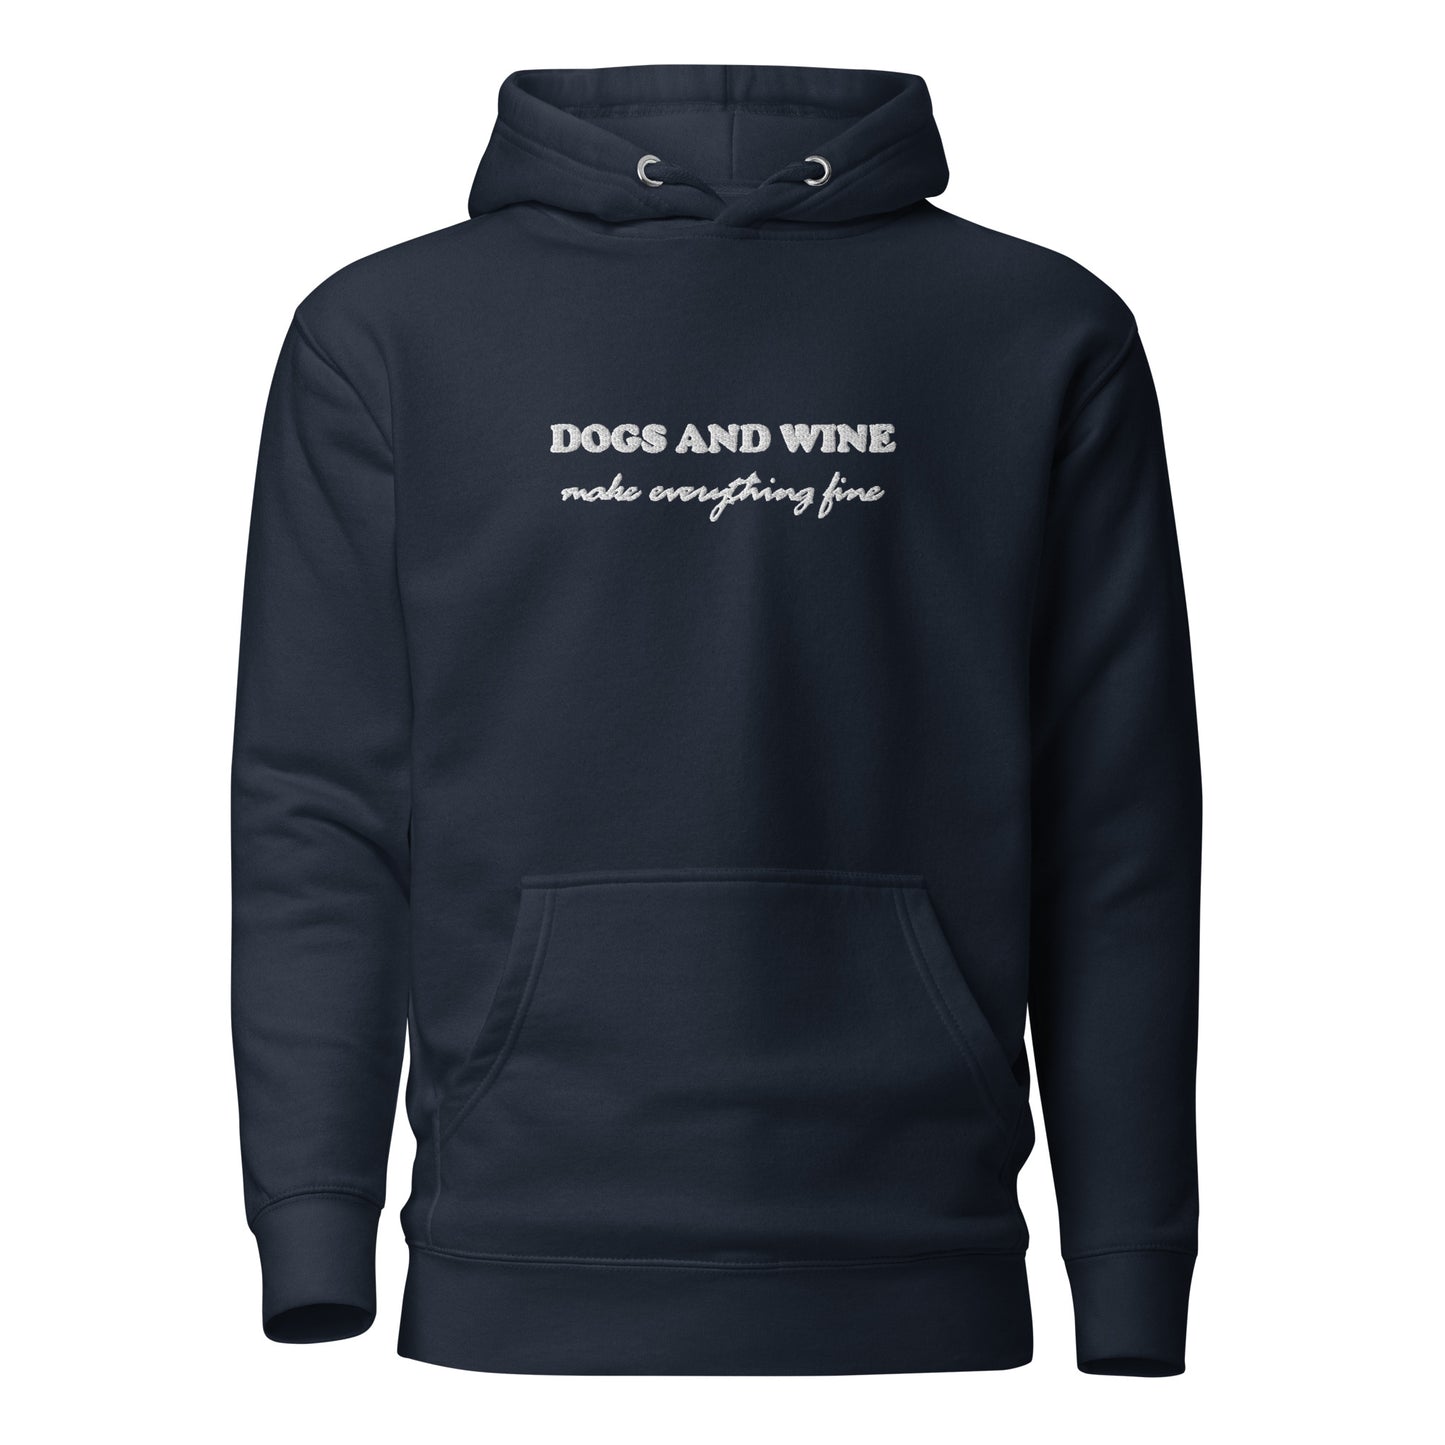 DOGS AND WINE - embroidered hoodie 